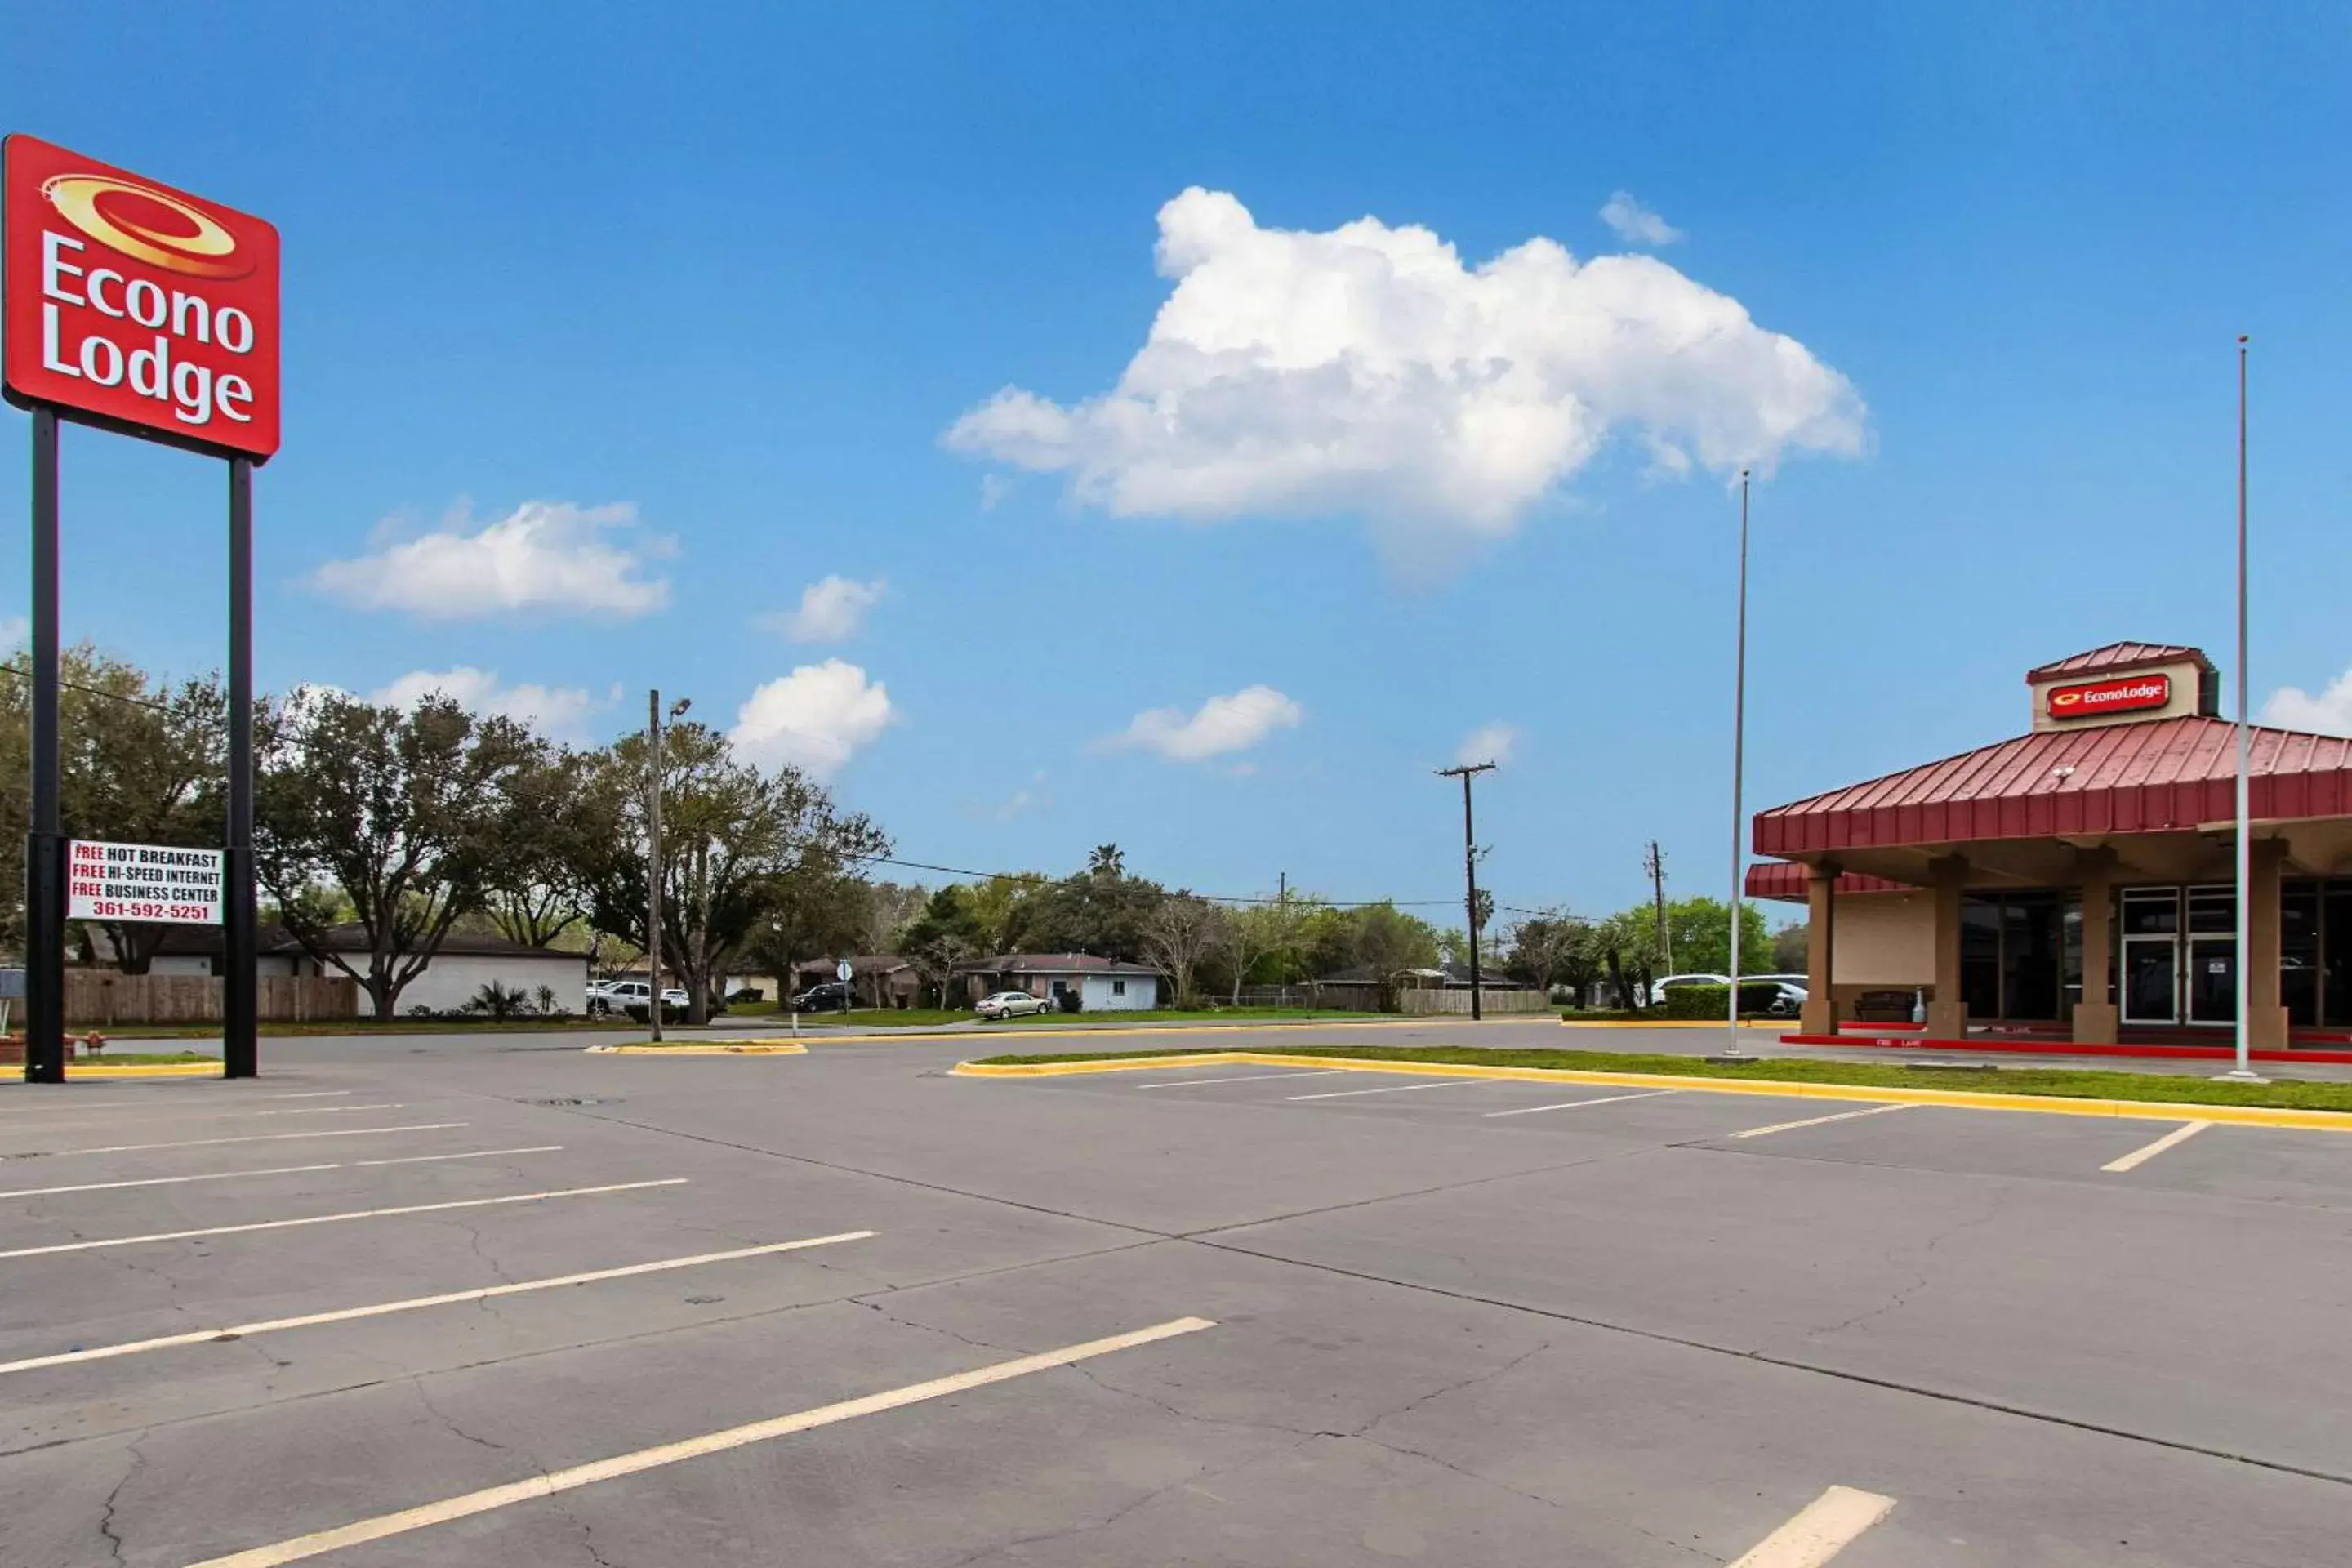 Property building in Econo Lodge Kingsville